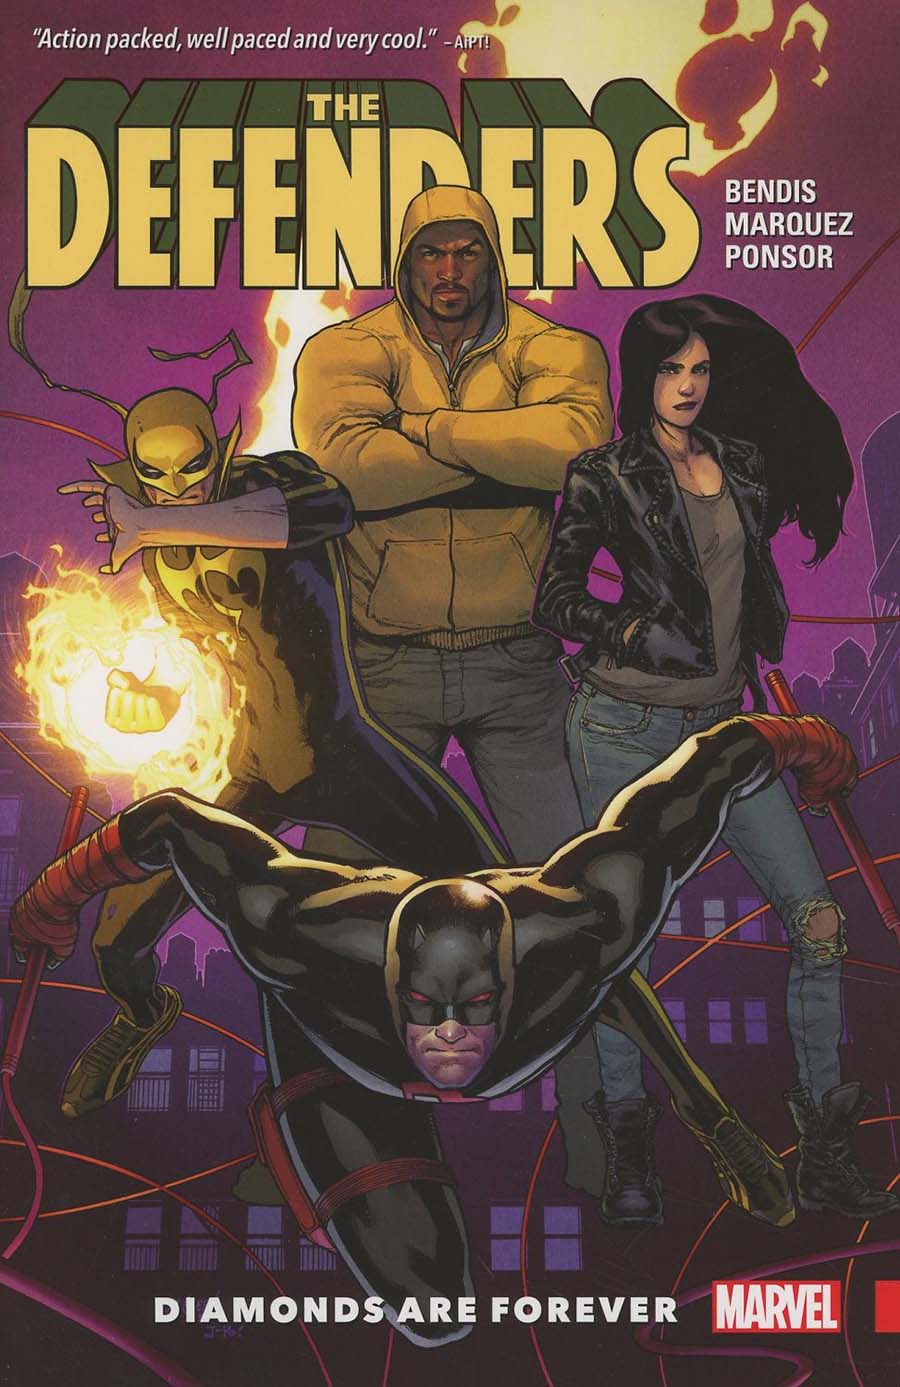 Defenders (2017) Vol 1 Diamonds Are Forever TP